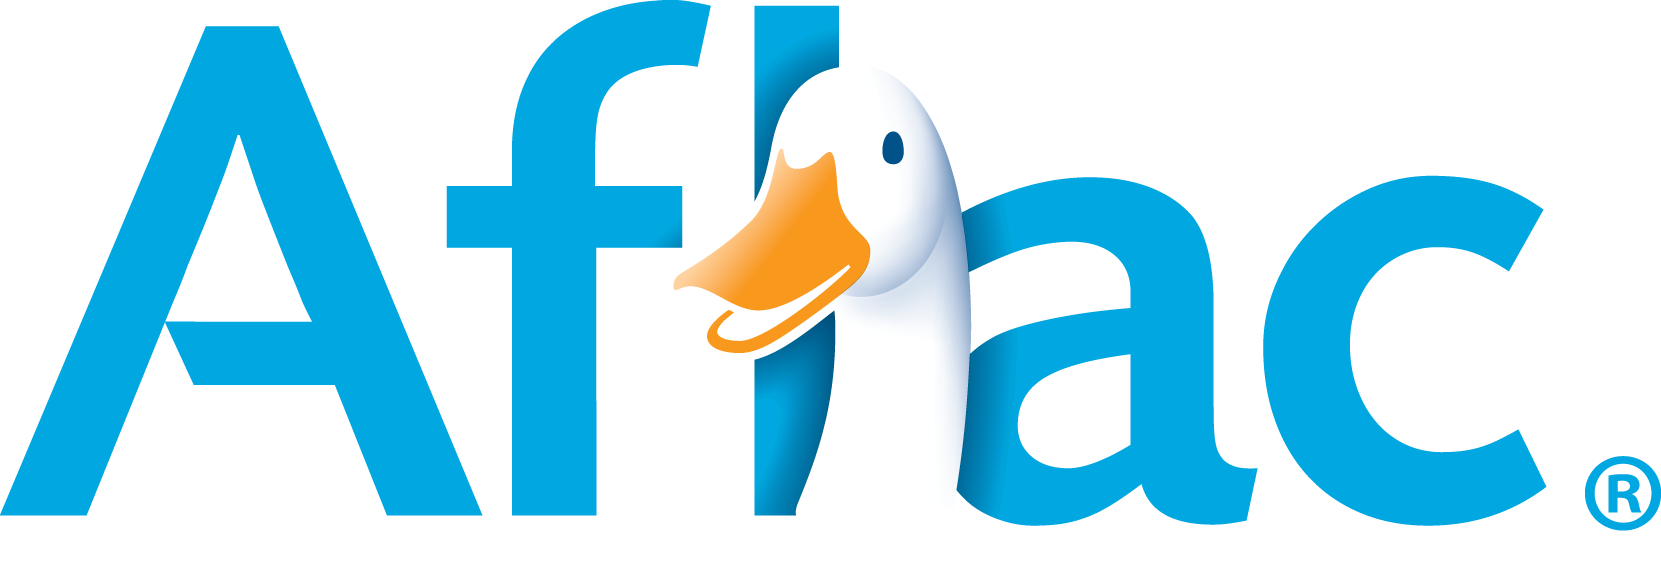 Visit Aflac's website by clicking the logo